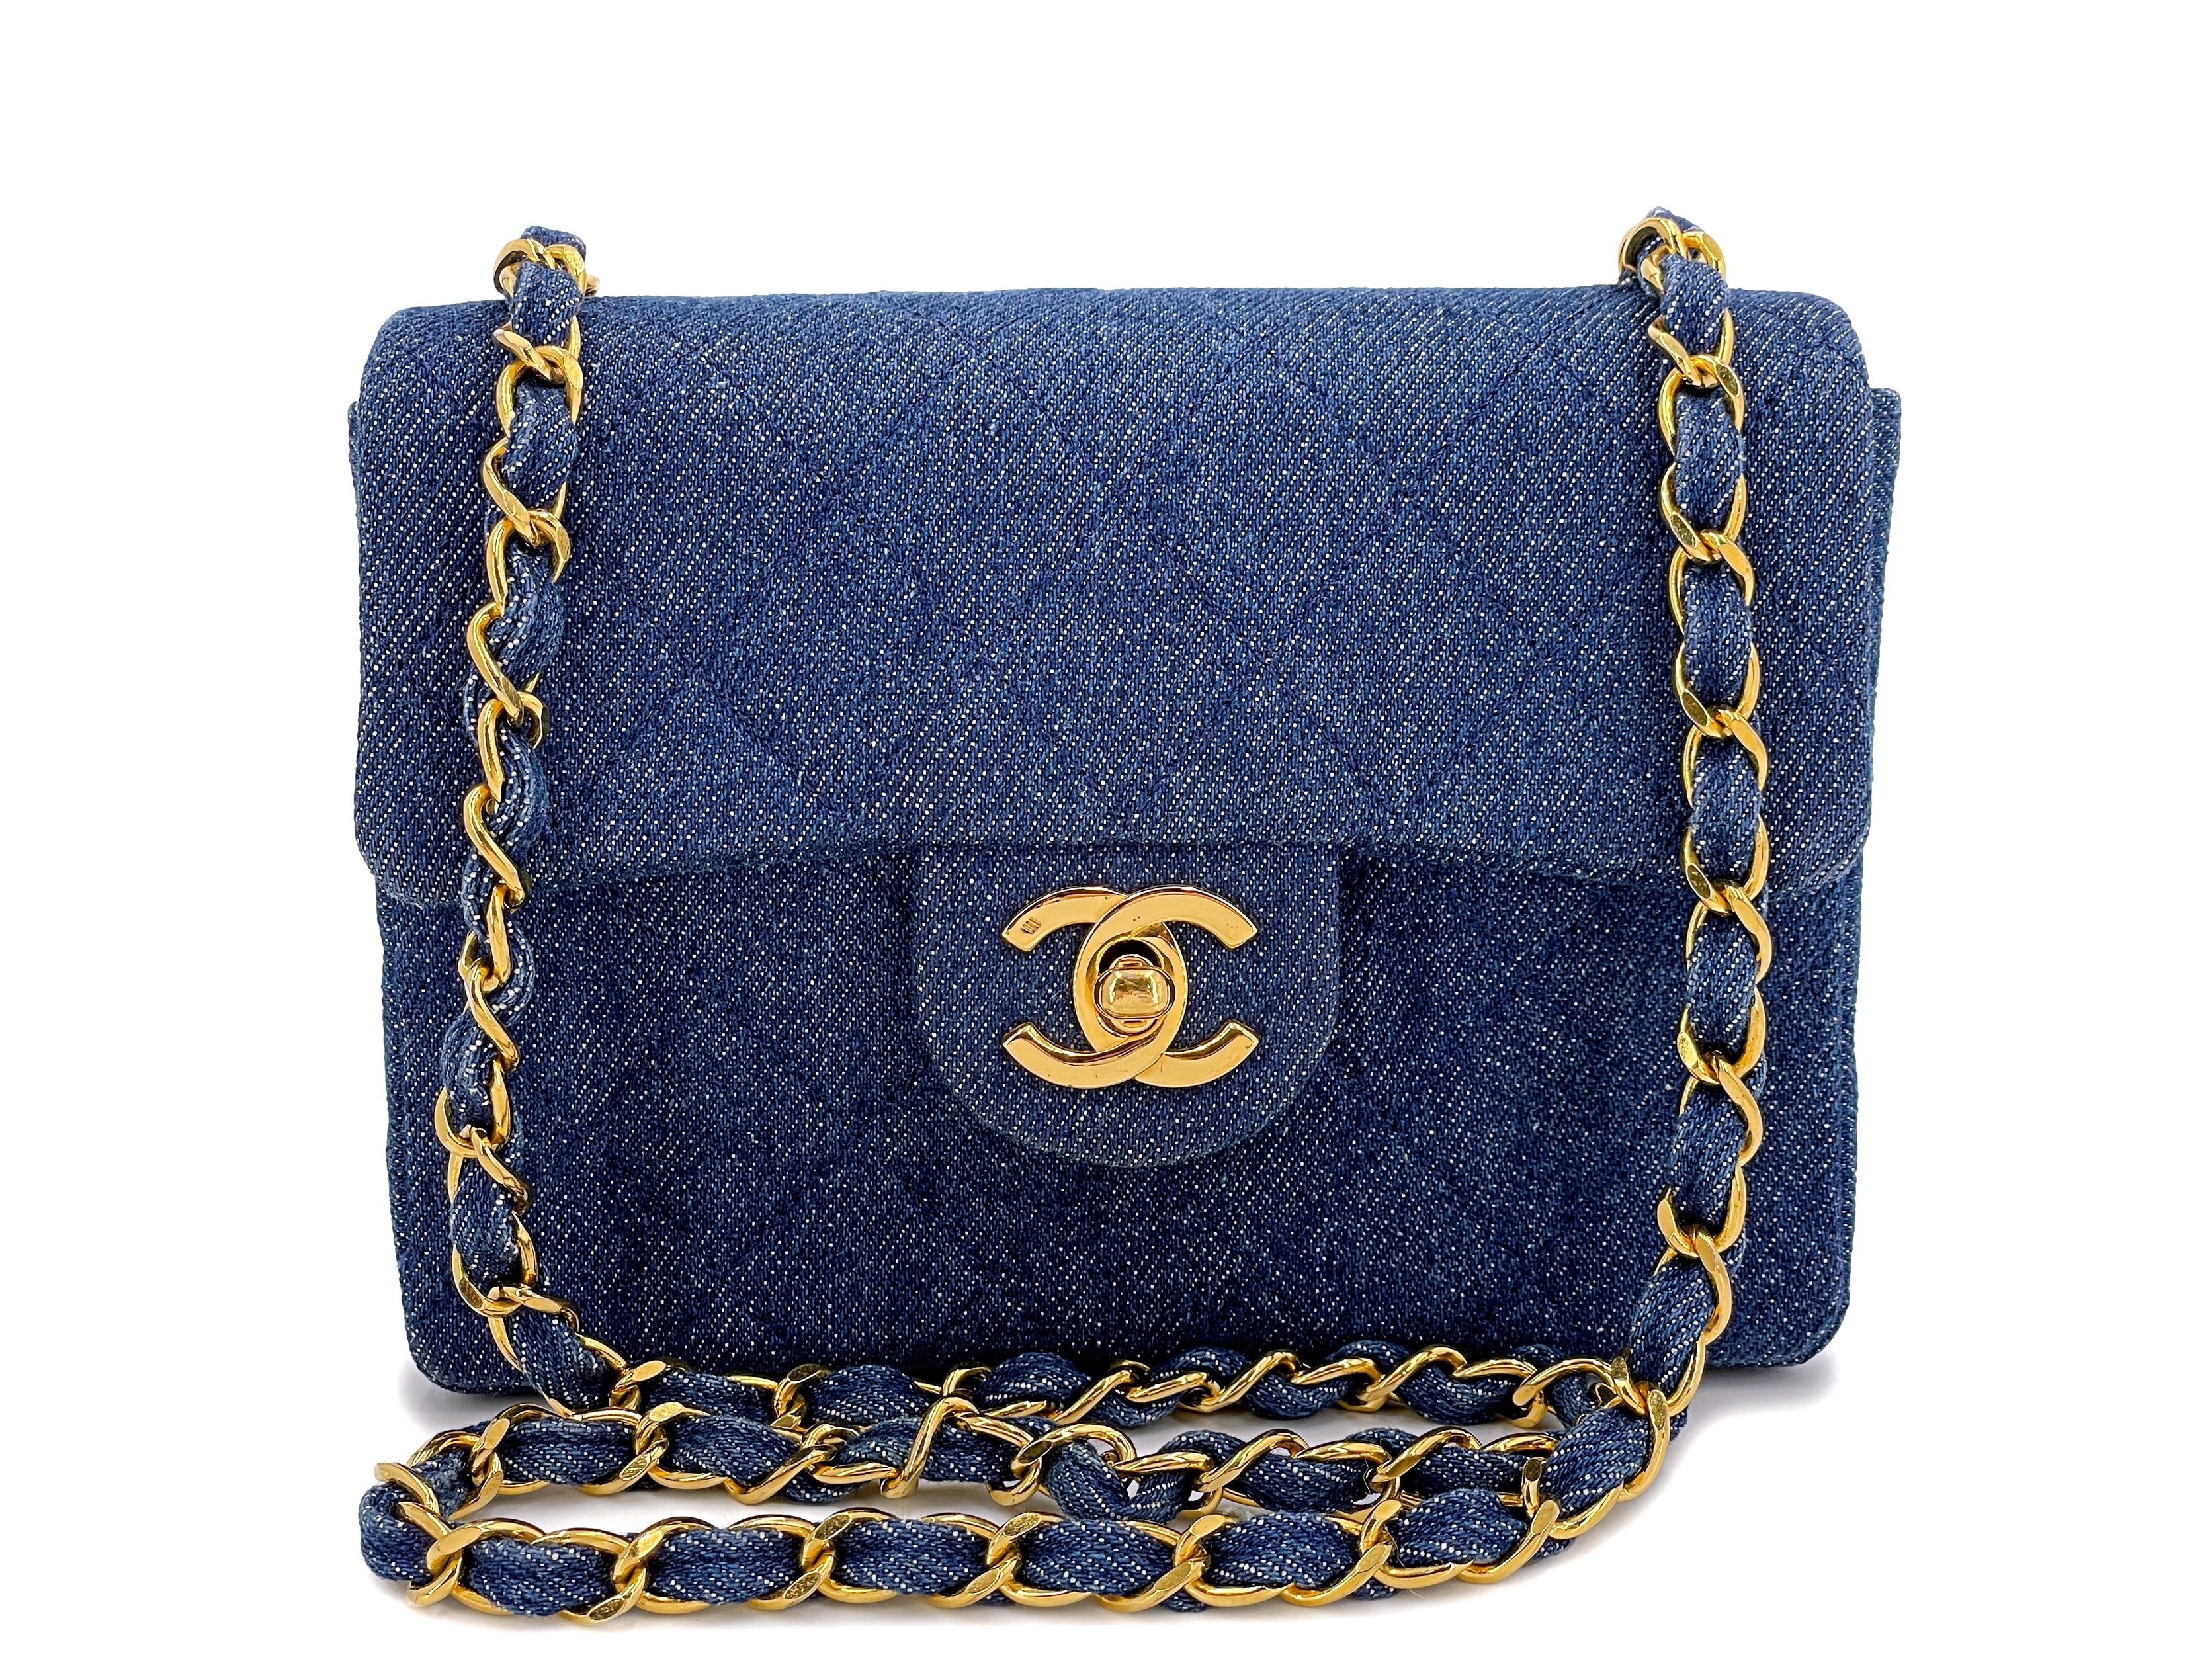 ON LAYAWAY CHANEL Rare Vintage 1990 Chartreuse Wool Jersey Mini Bag